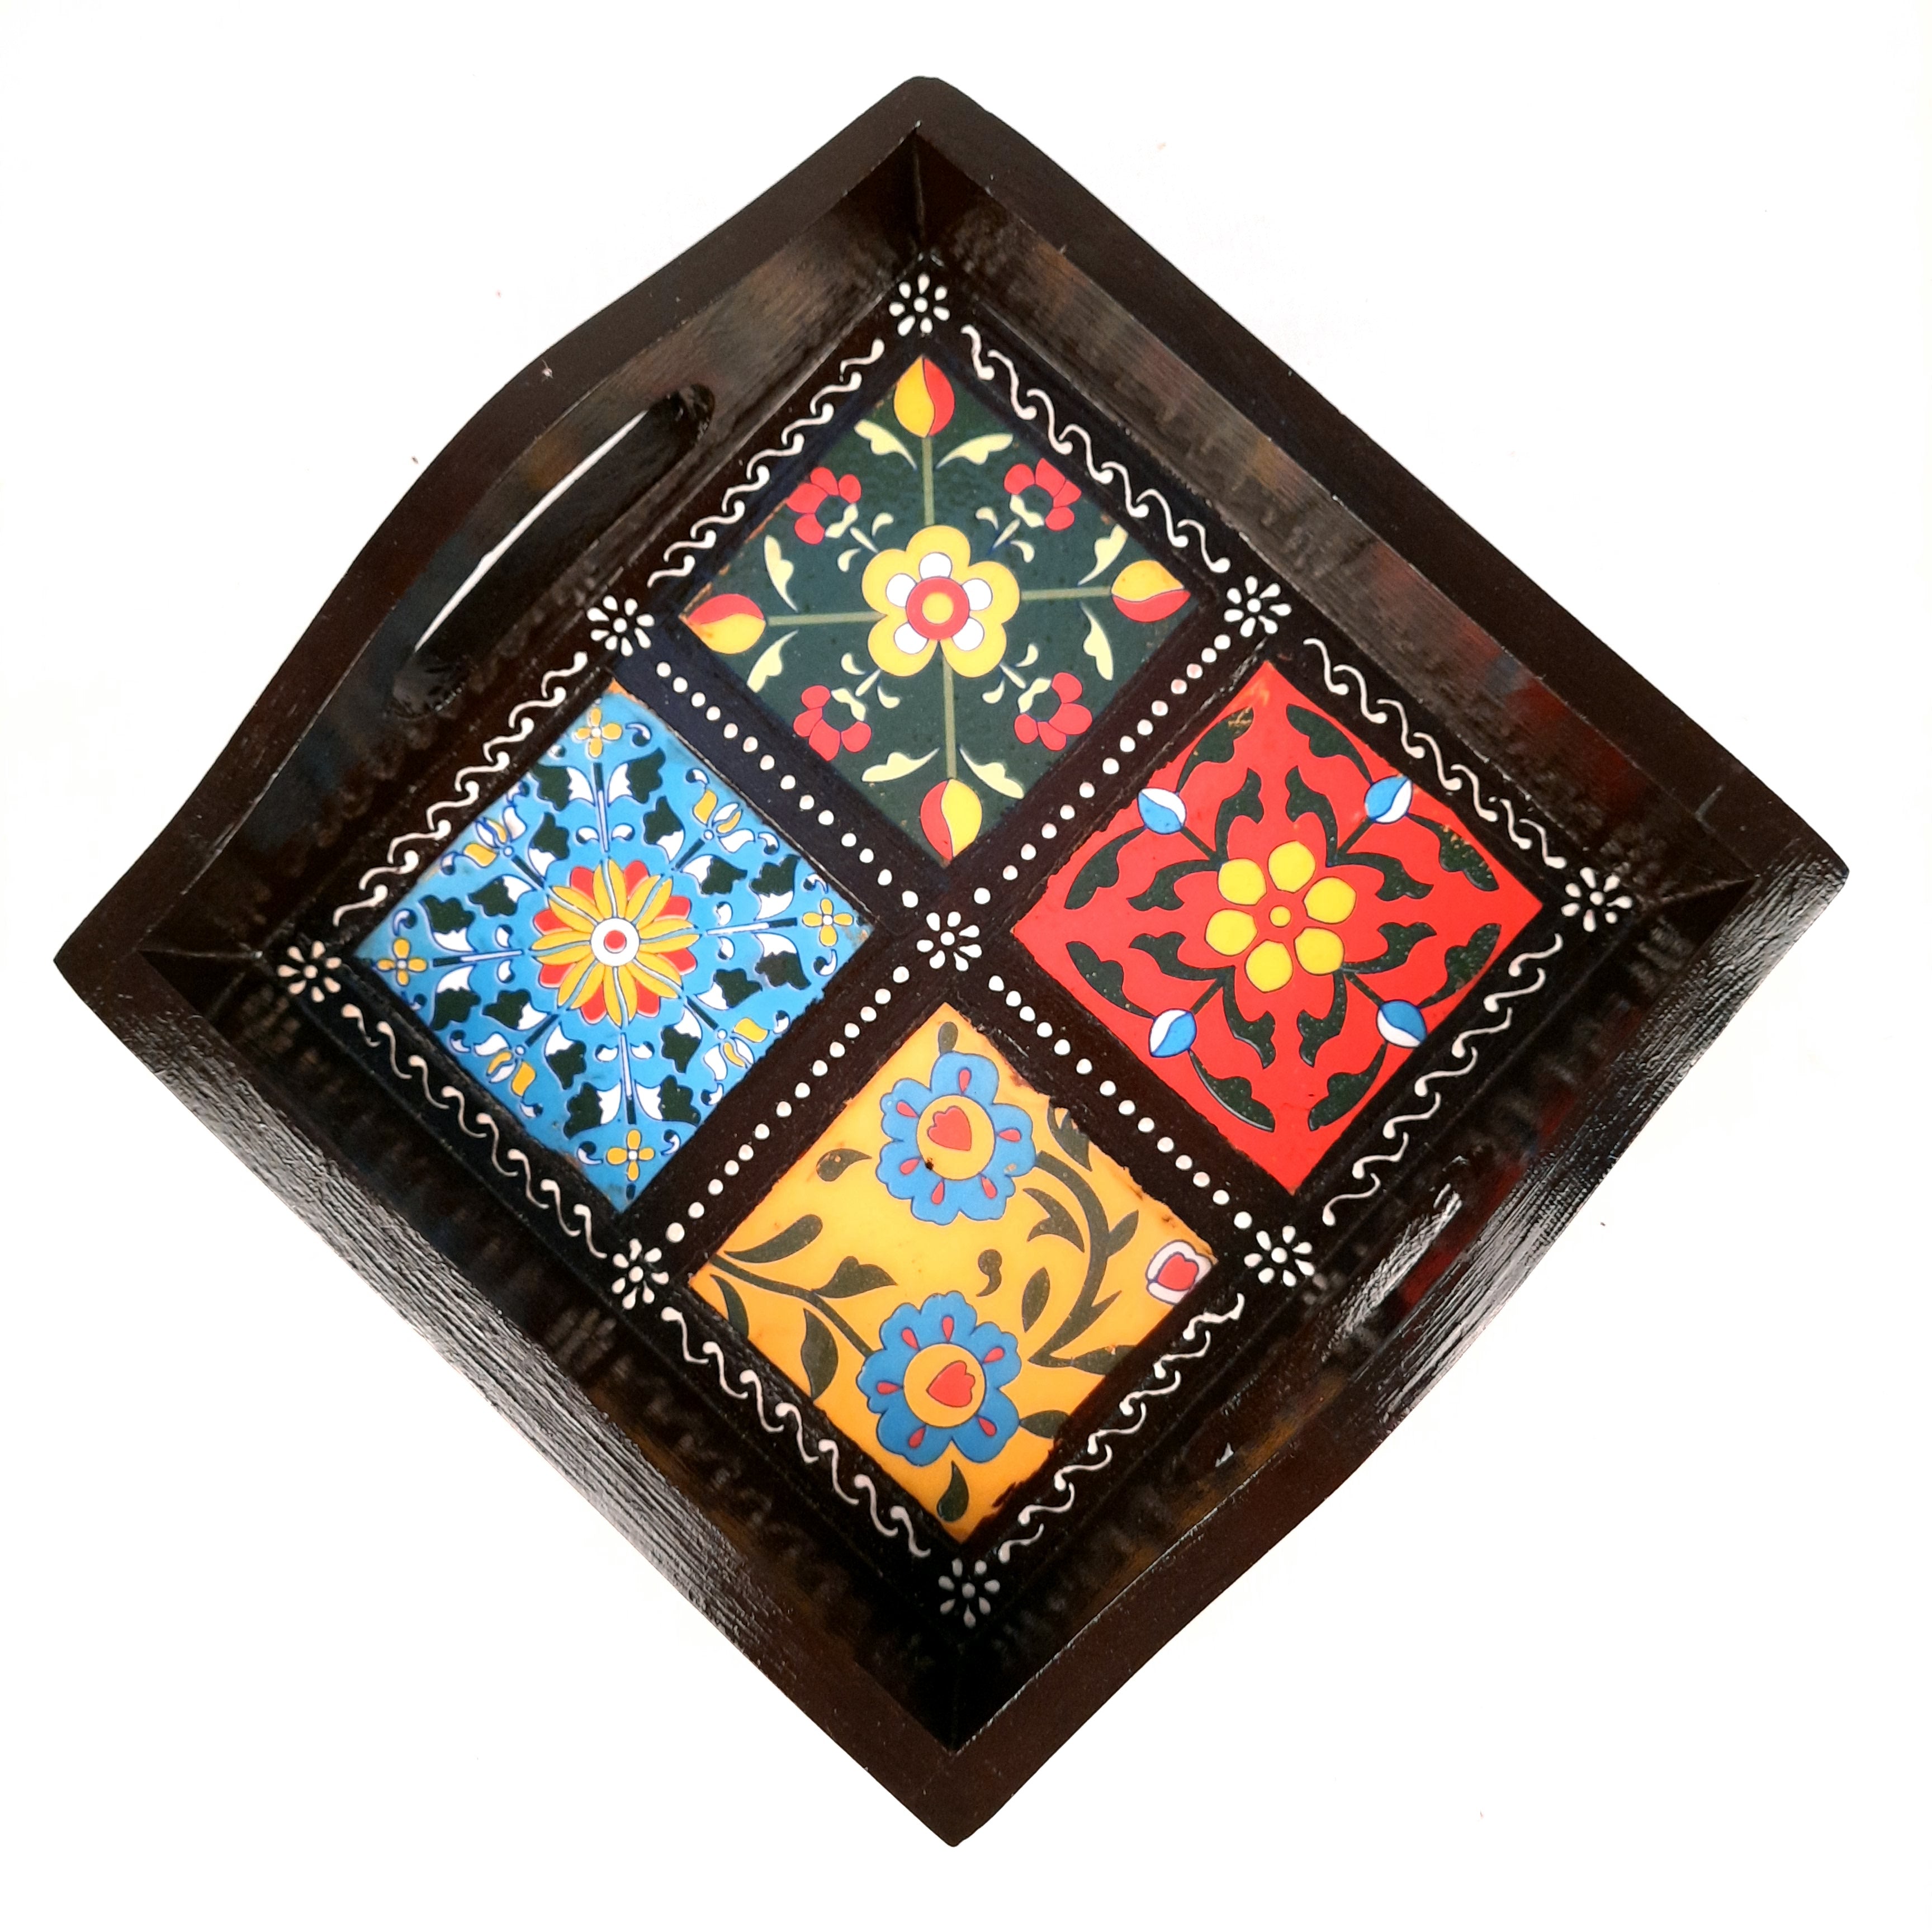 Serving Tray With In-Built Ceramic Tiles | Tea Tray - For Serving, Kitchen, Home Decor & Gifts - 9 Inch -Apkamart #Style_Designer